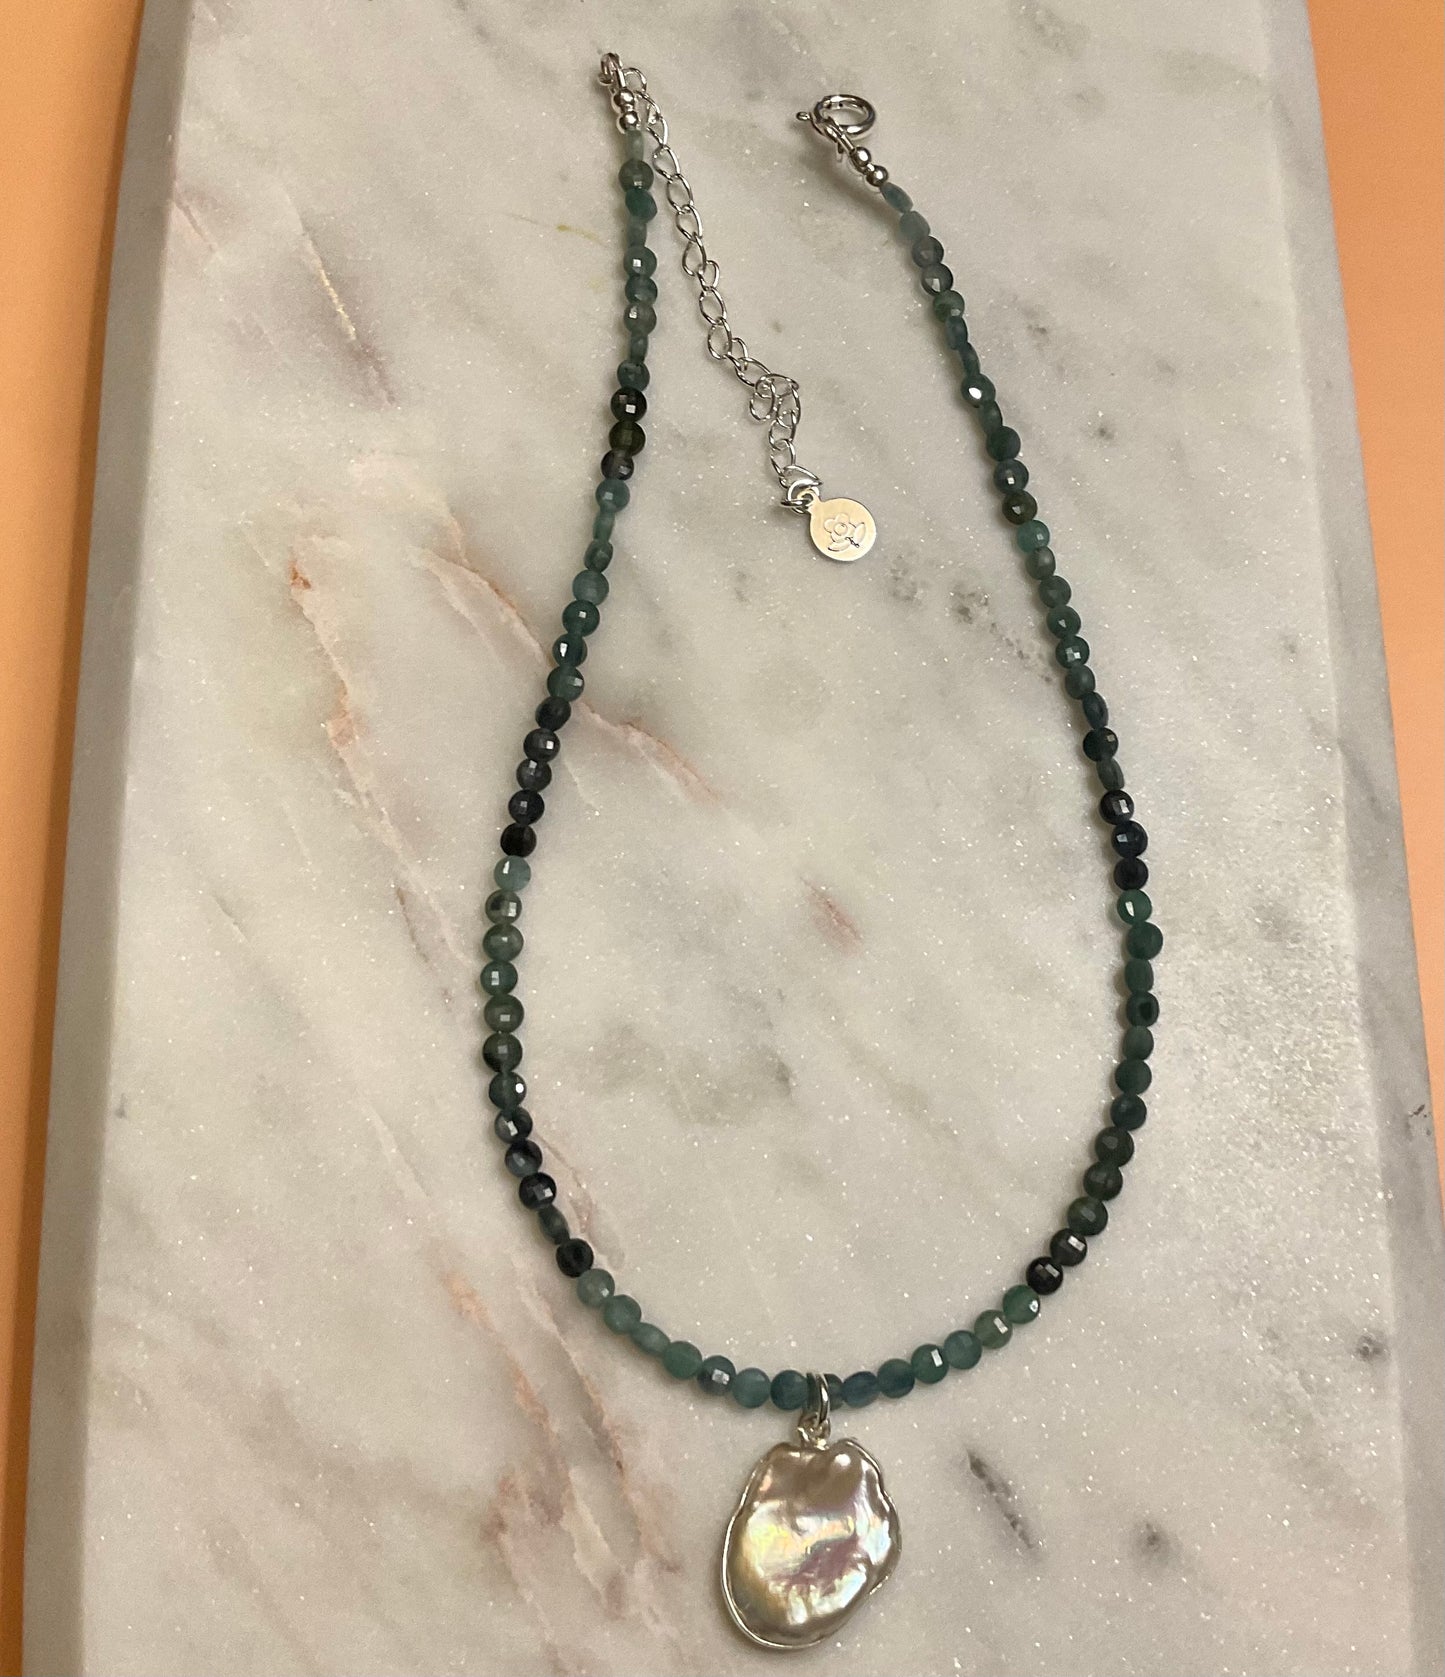 Indicolite Tourmaline Faceted Necklace with Pearl Pendant